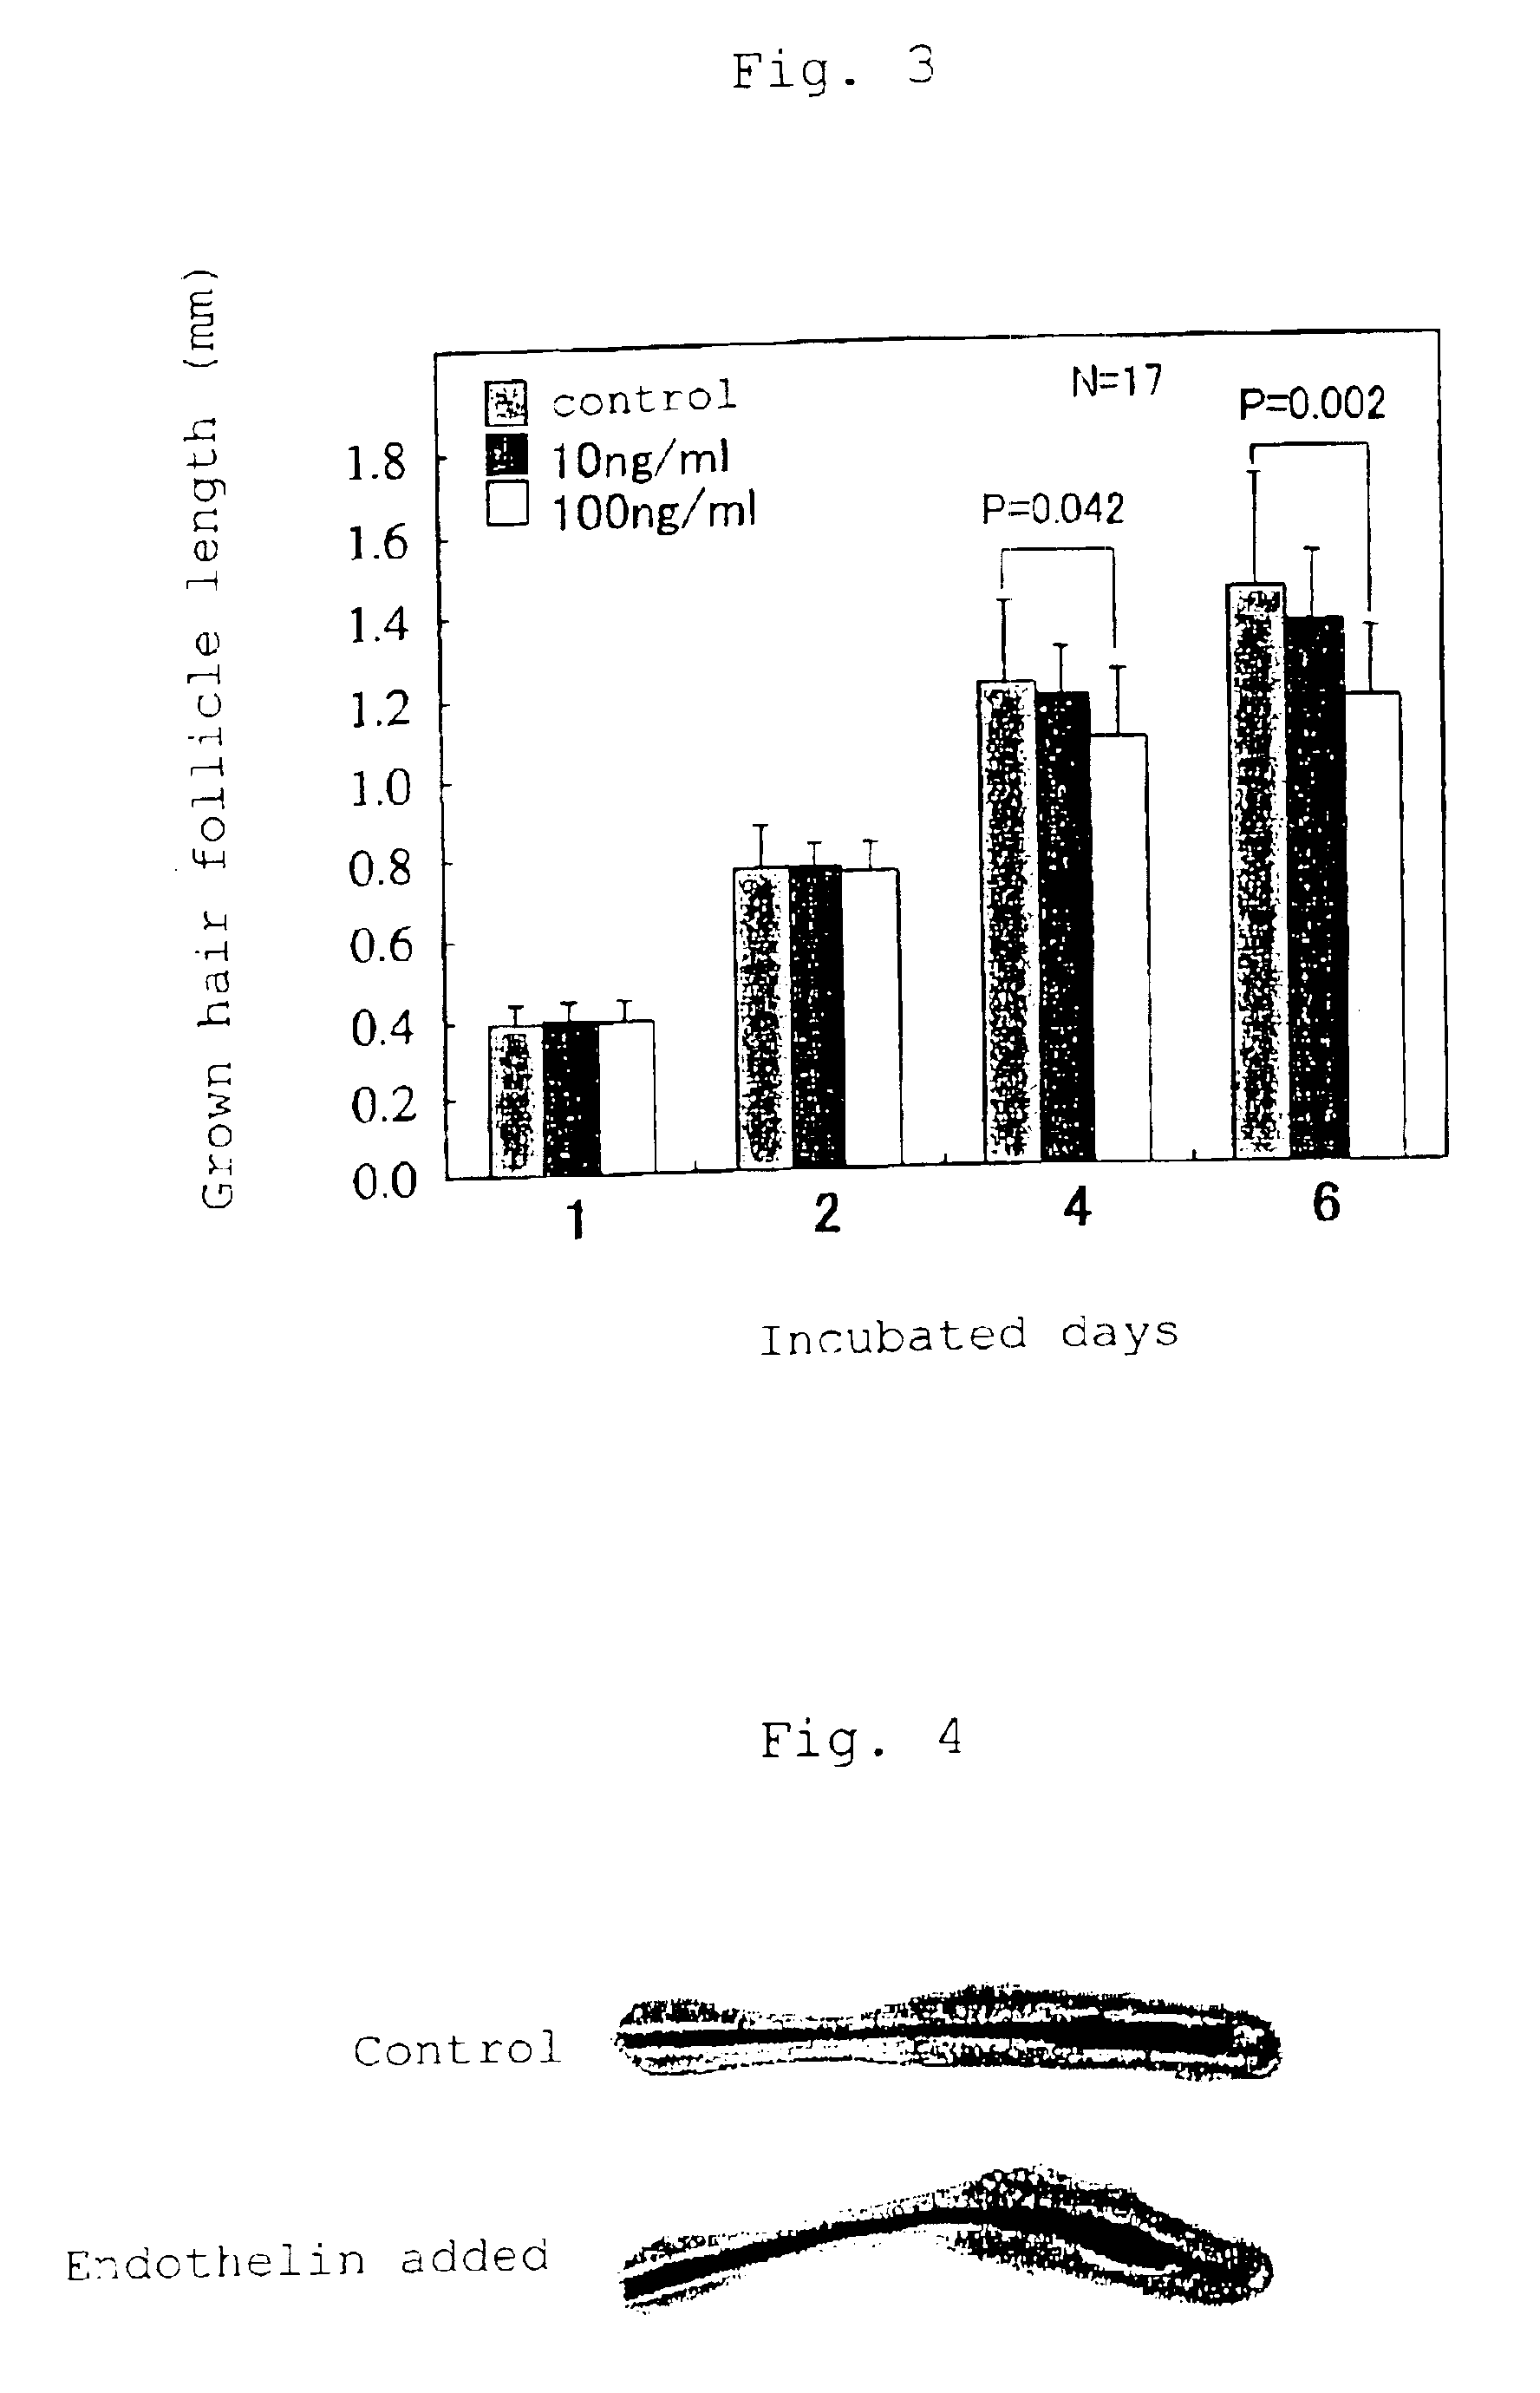 Depilatories and agents for external use